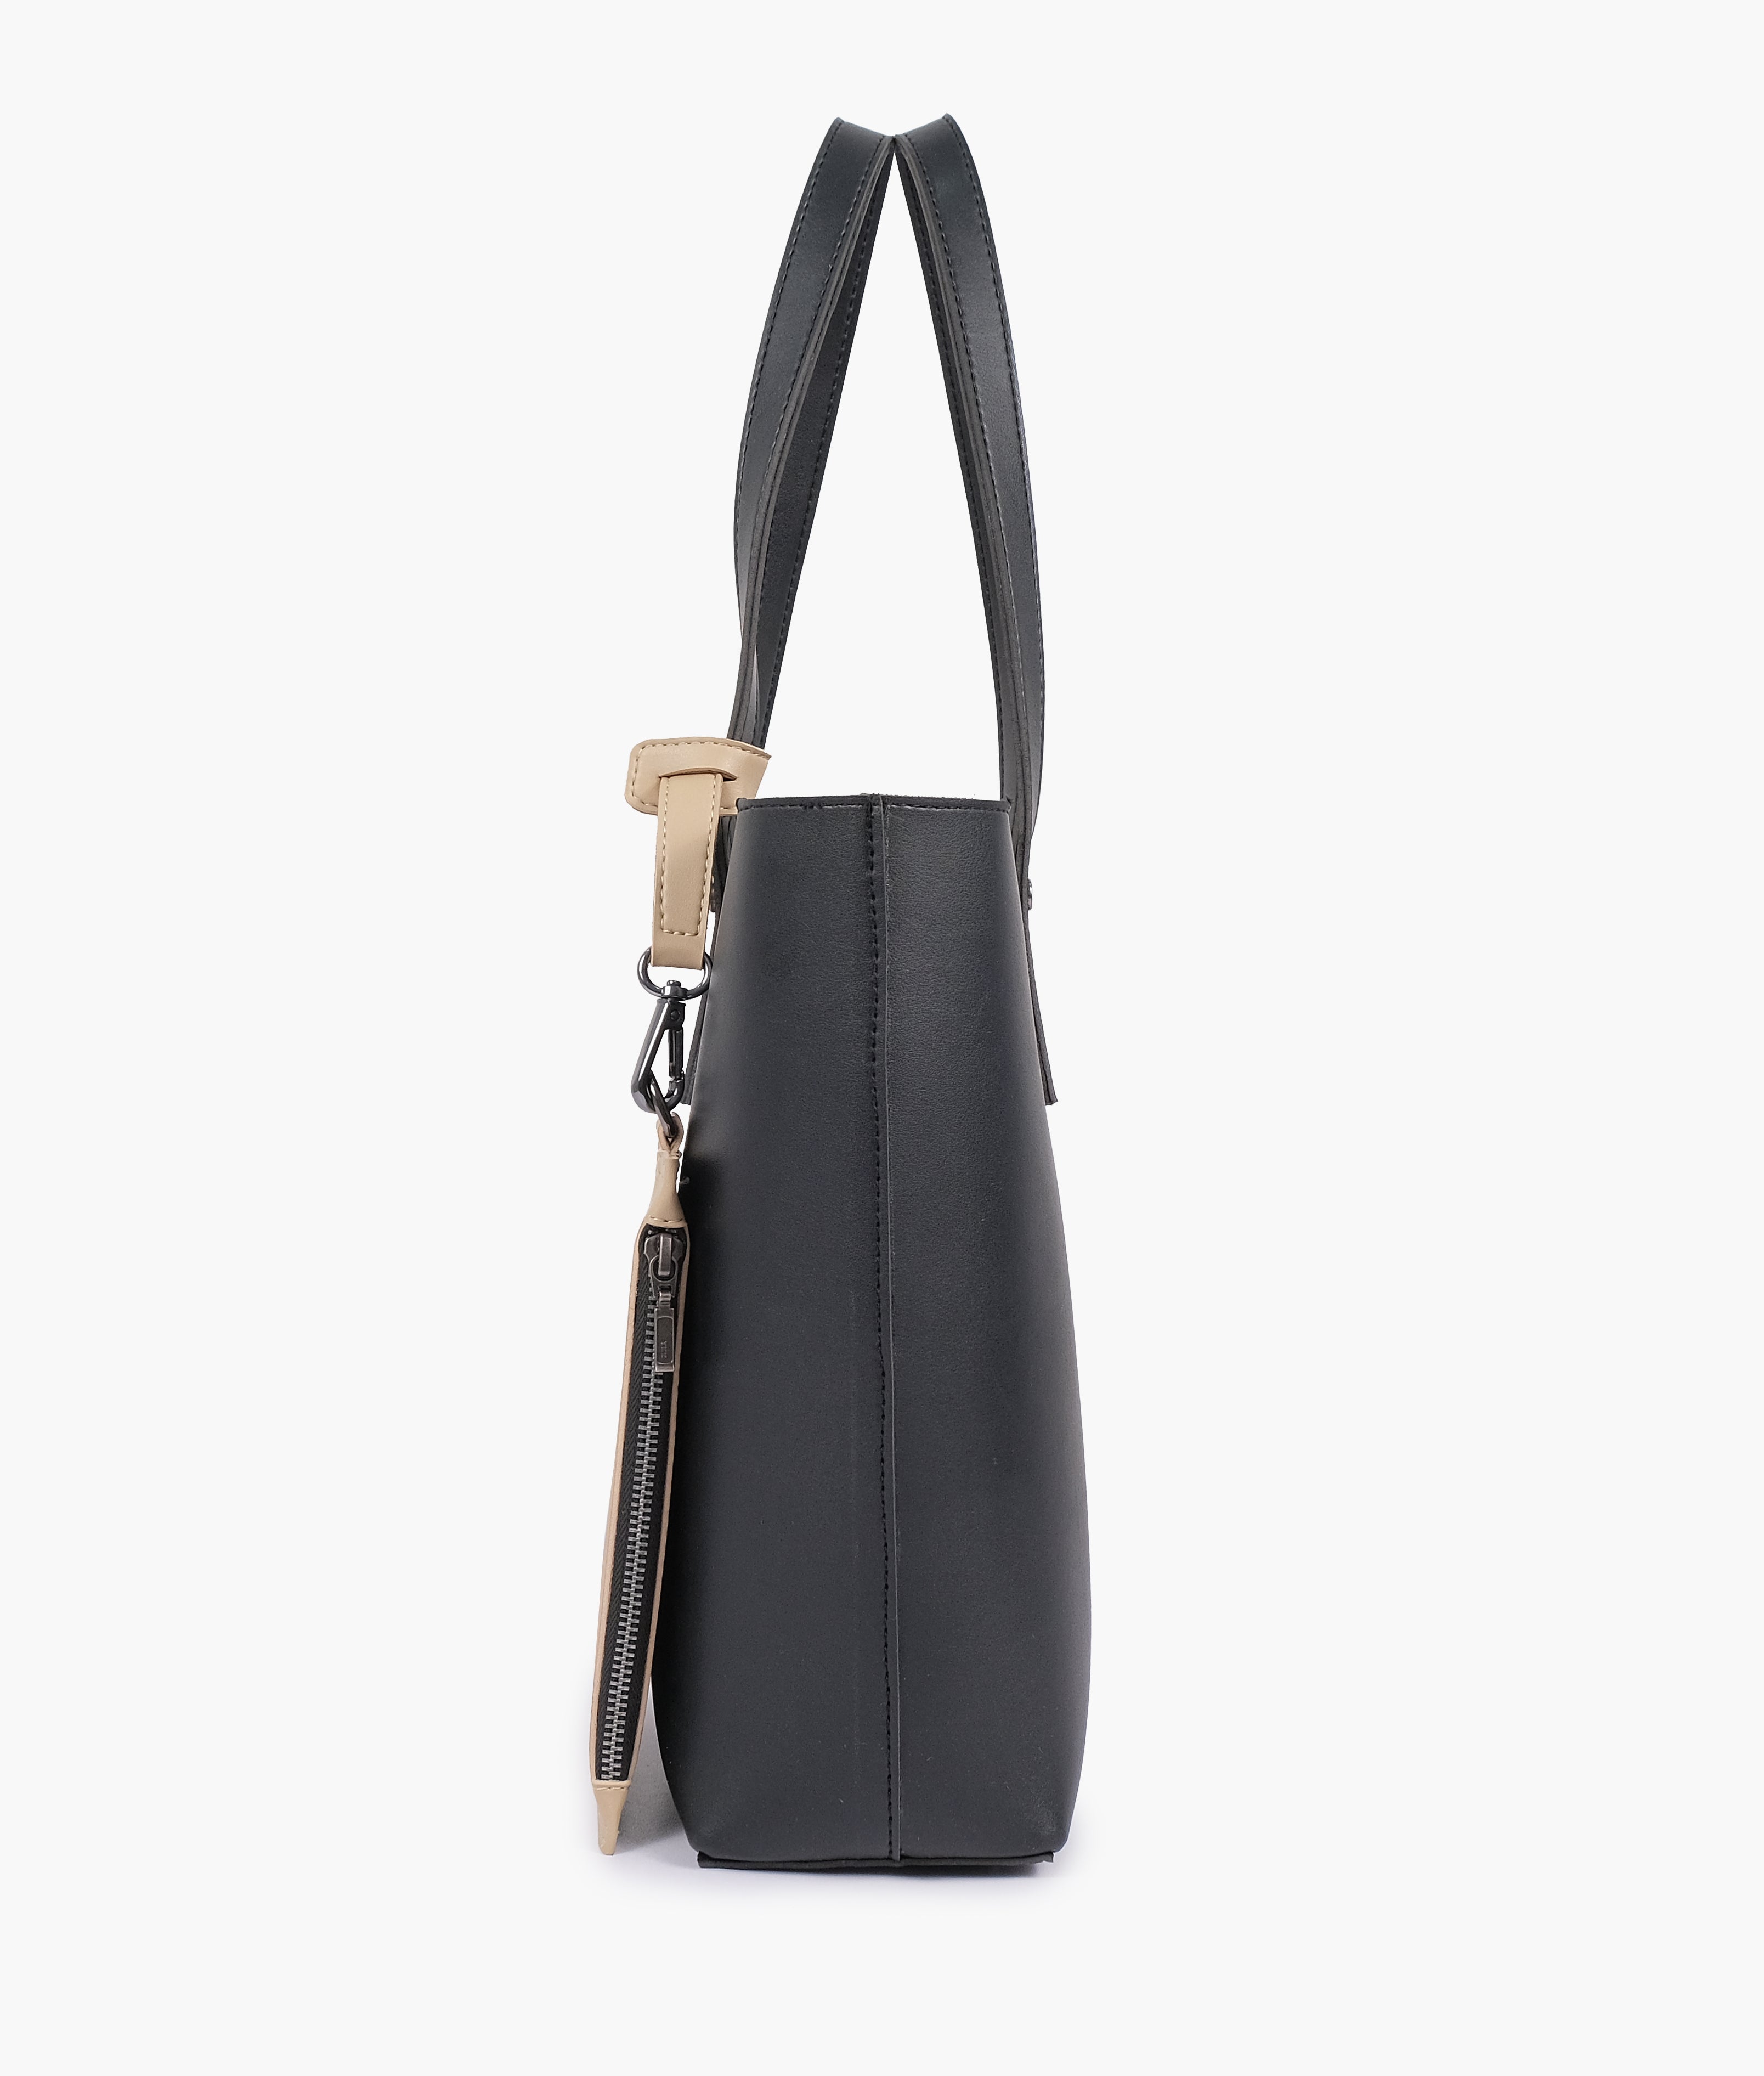 Black tote bag with detachable pouch